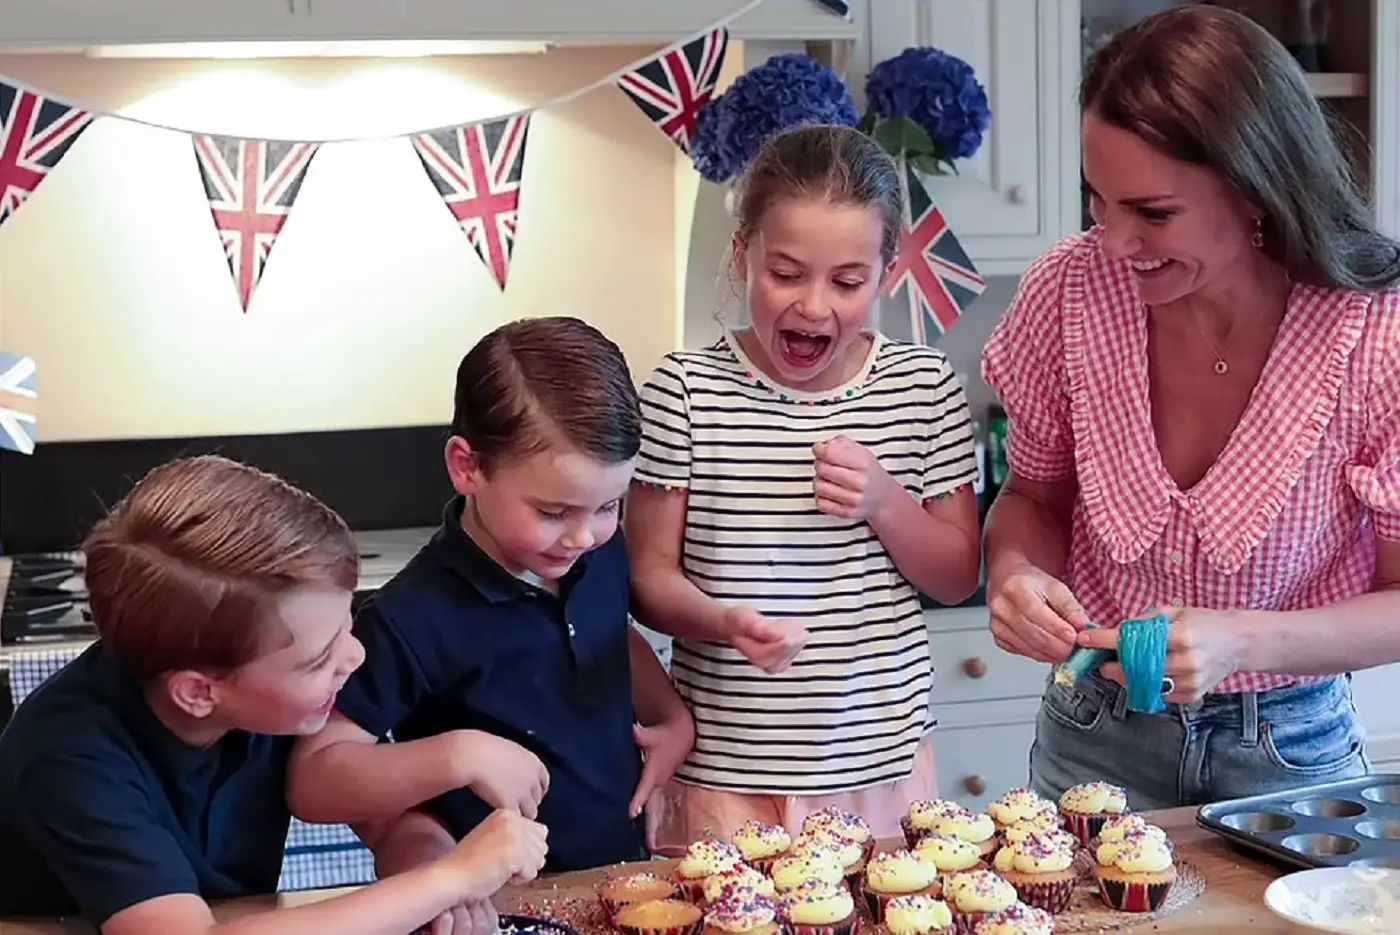 The Duchess of Cambridge baked for platinum jubilee celebrations with Prince George, Princess charlotte and Prince louis